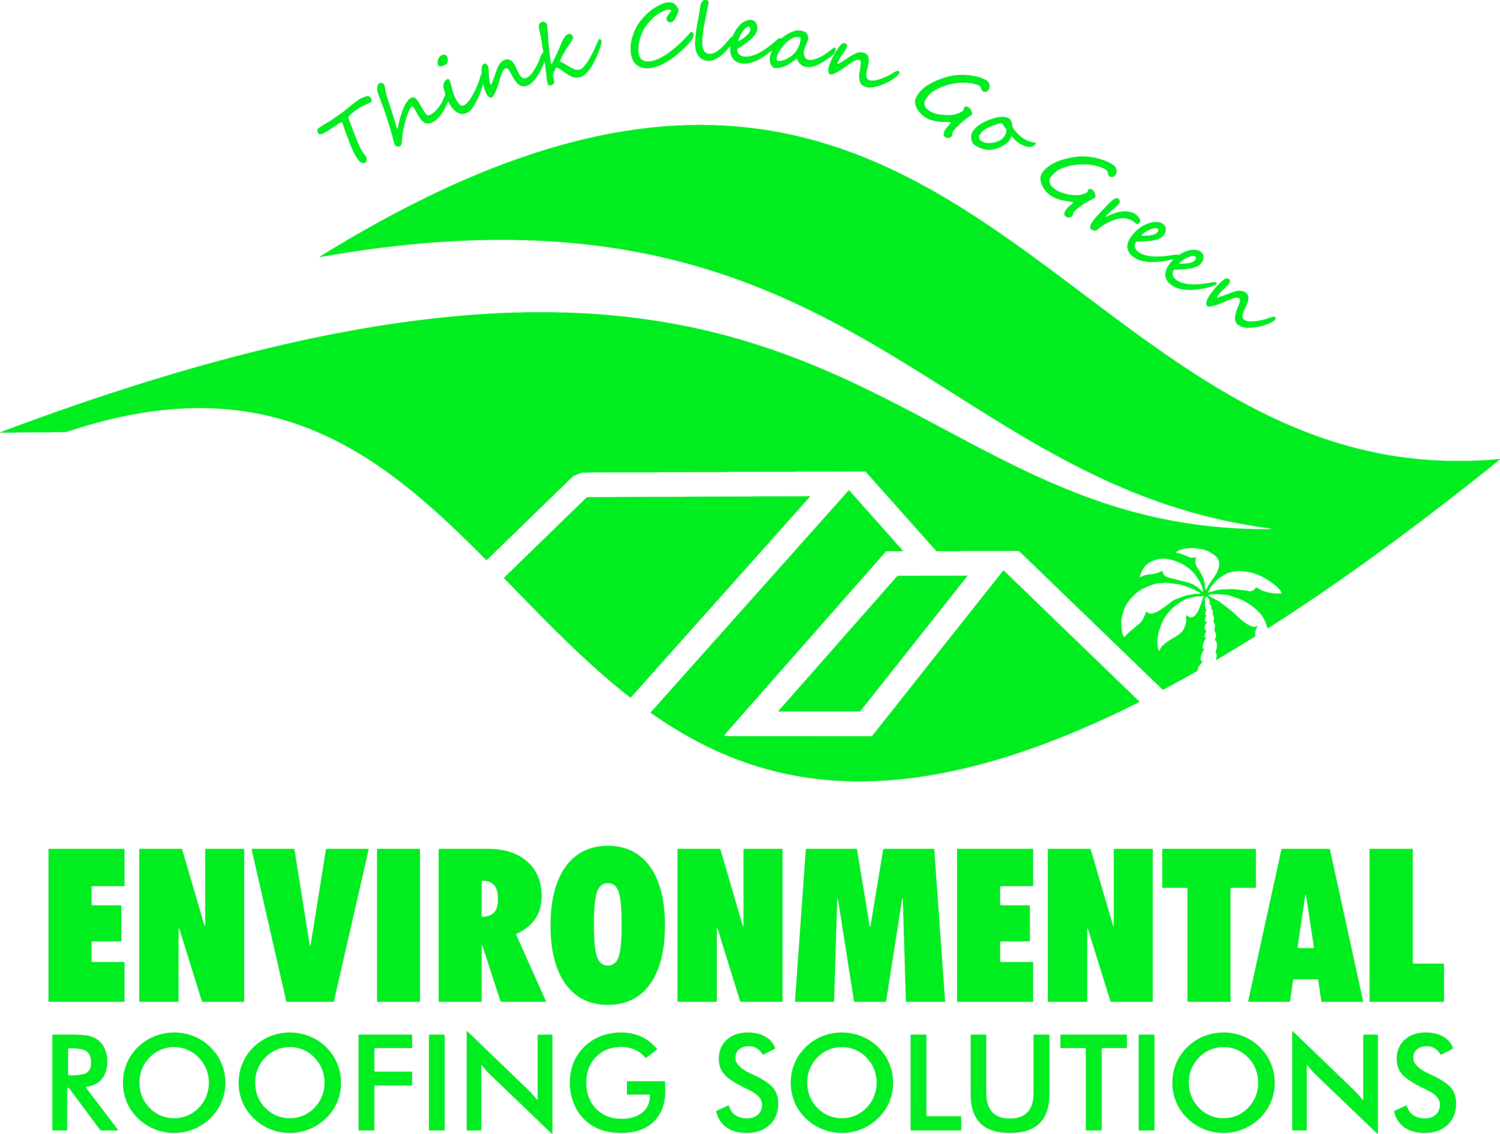 Environmental Roofing Solutions - Honolulu, Hawaii Roofing Company